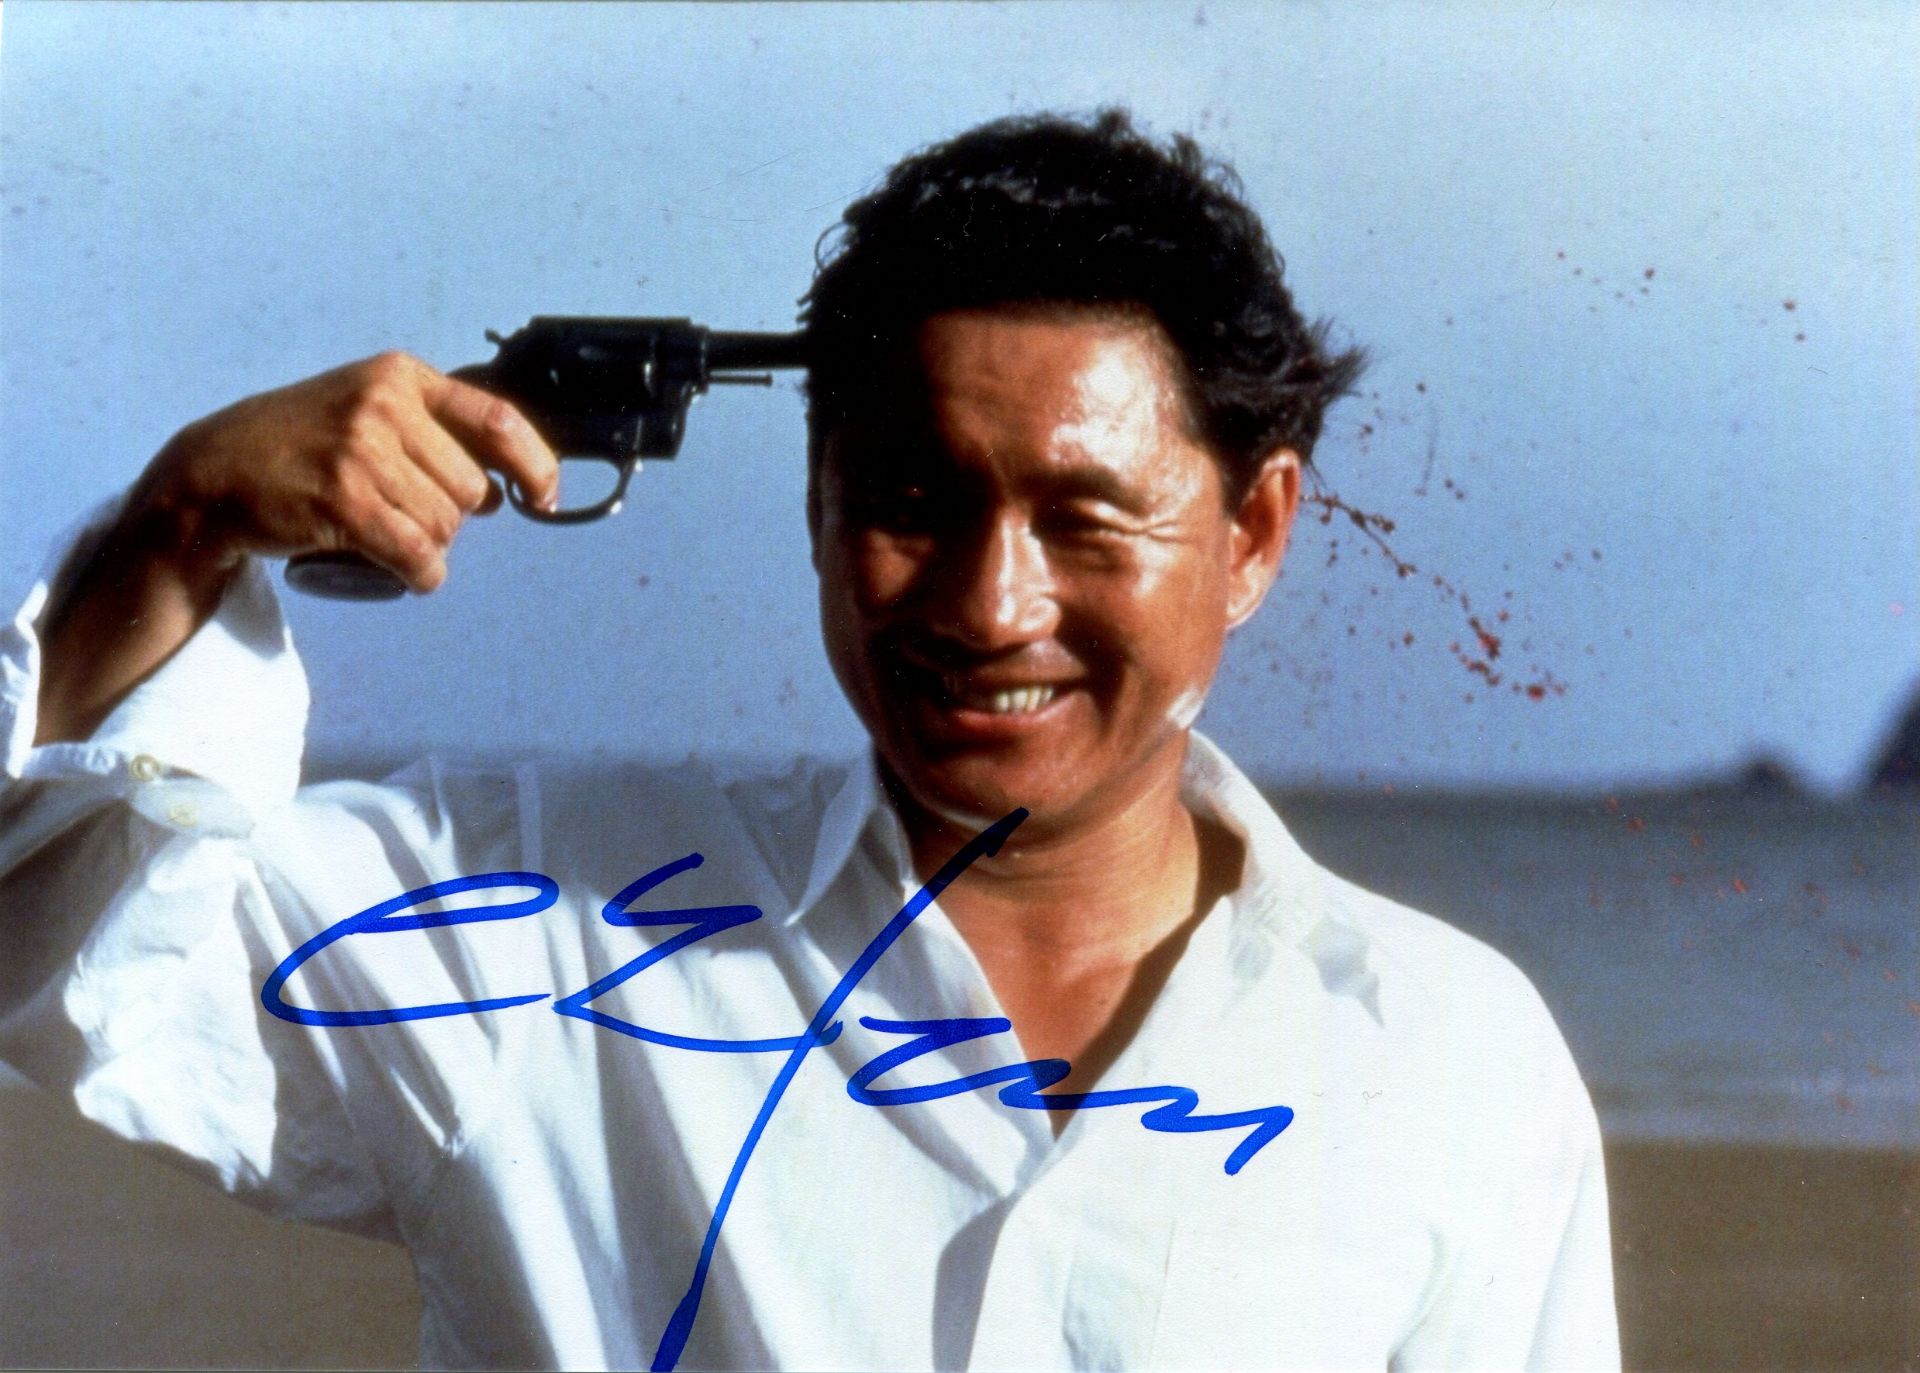 KITANO TAKESHI: (1947- ) Japanese comedian, actor and filmmaker.